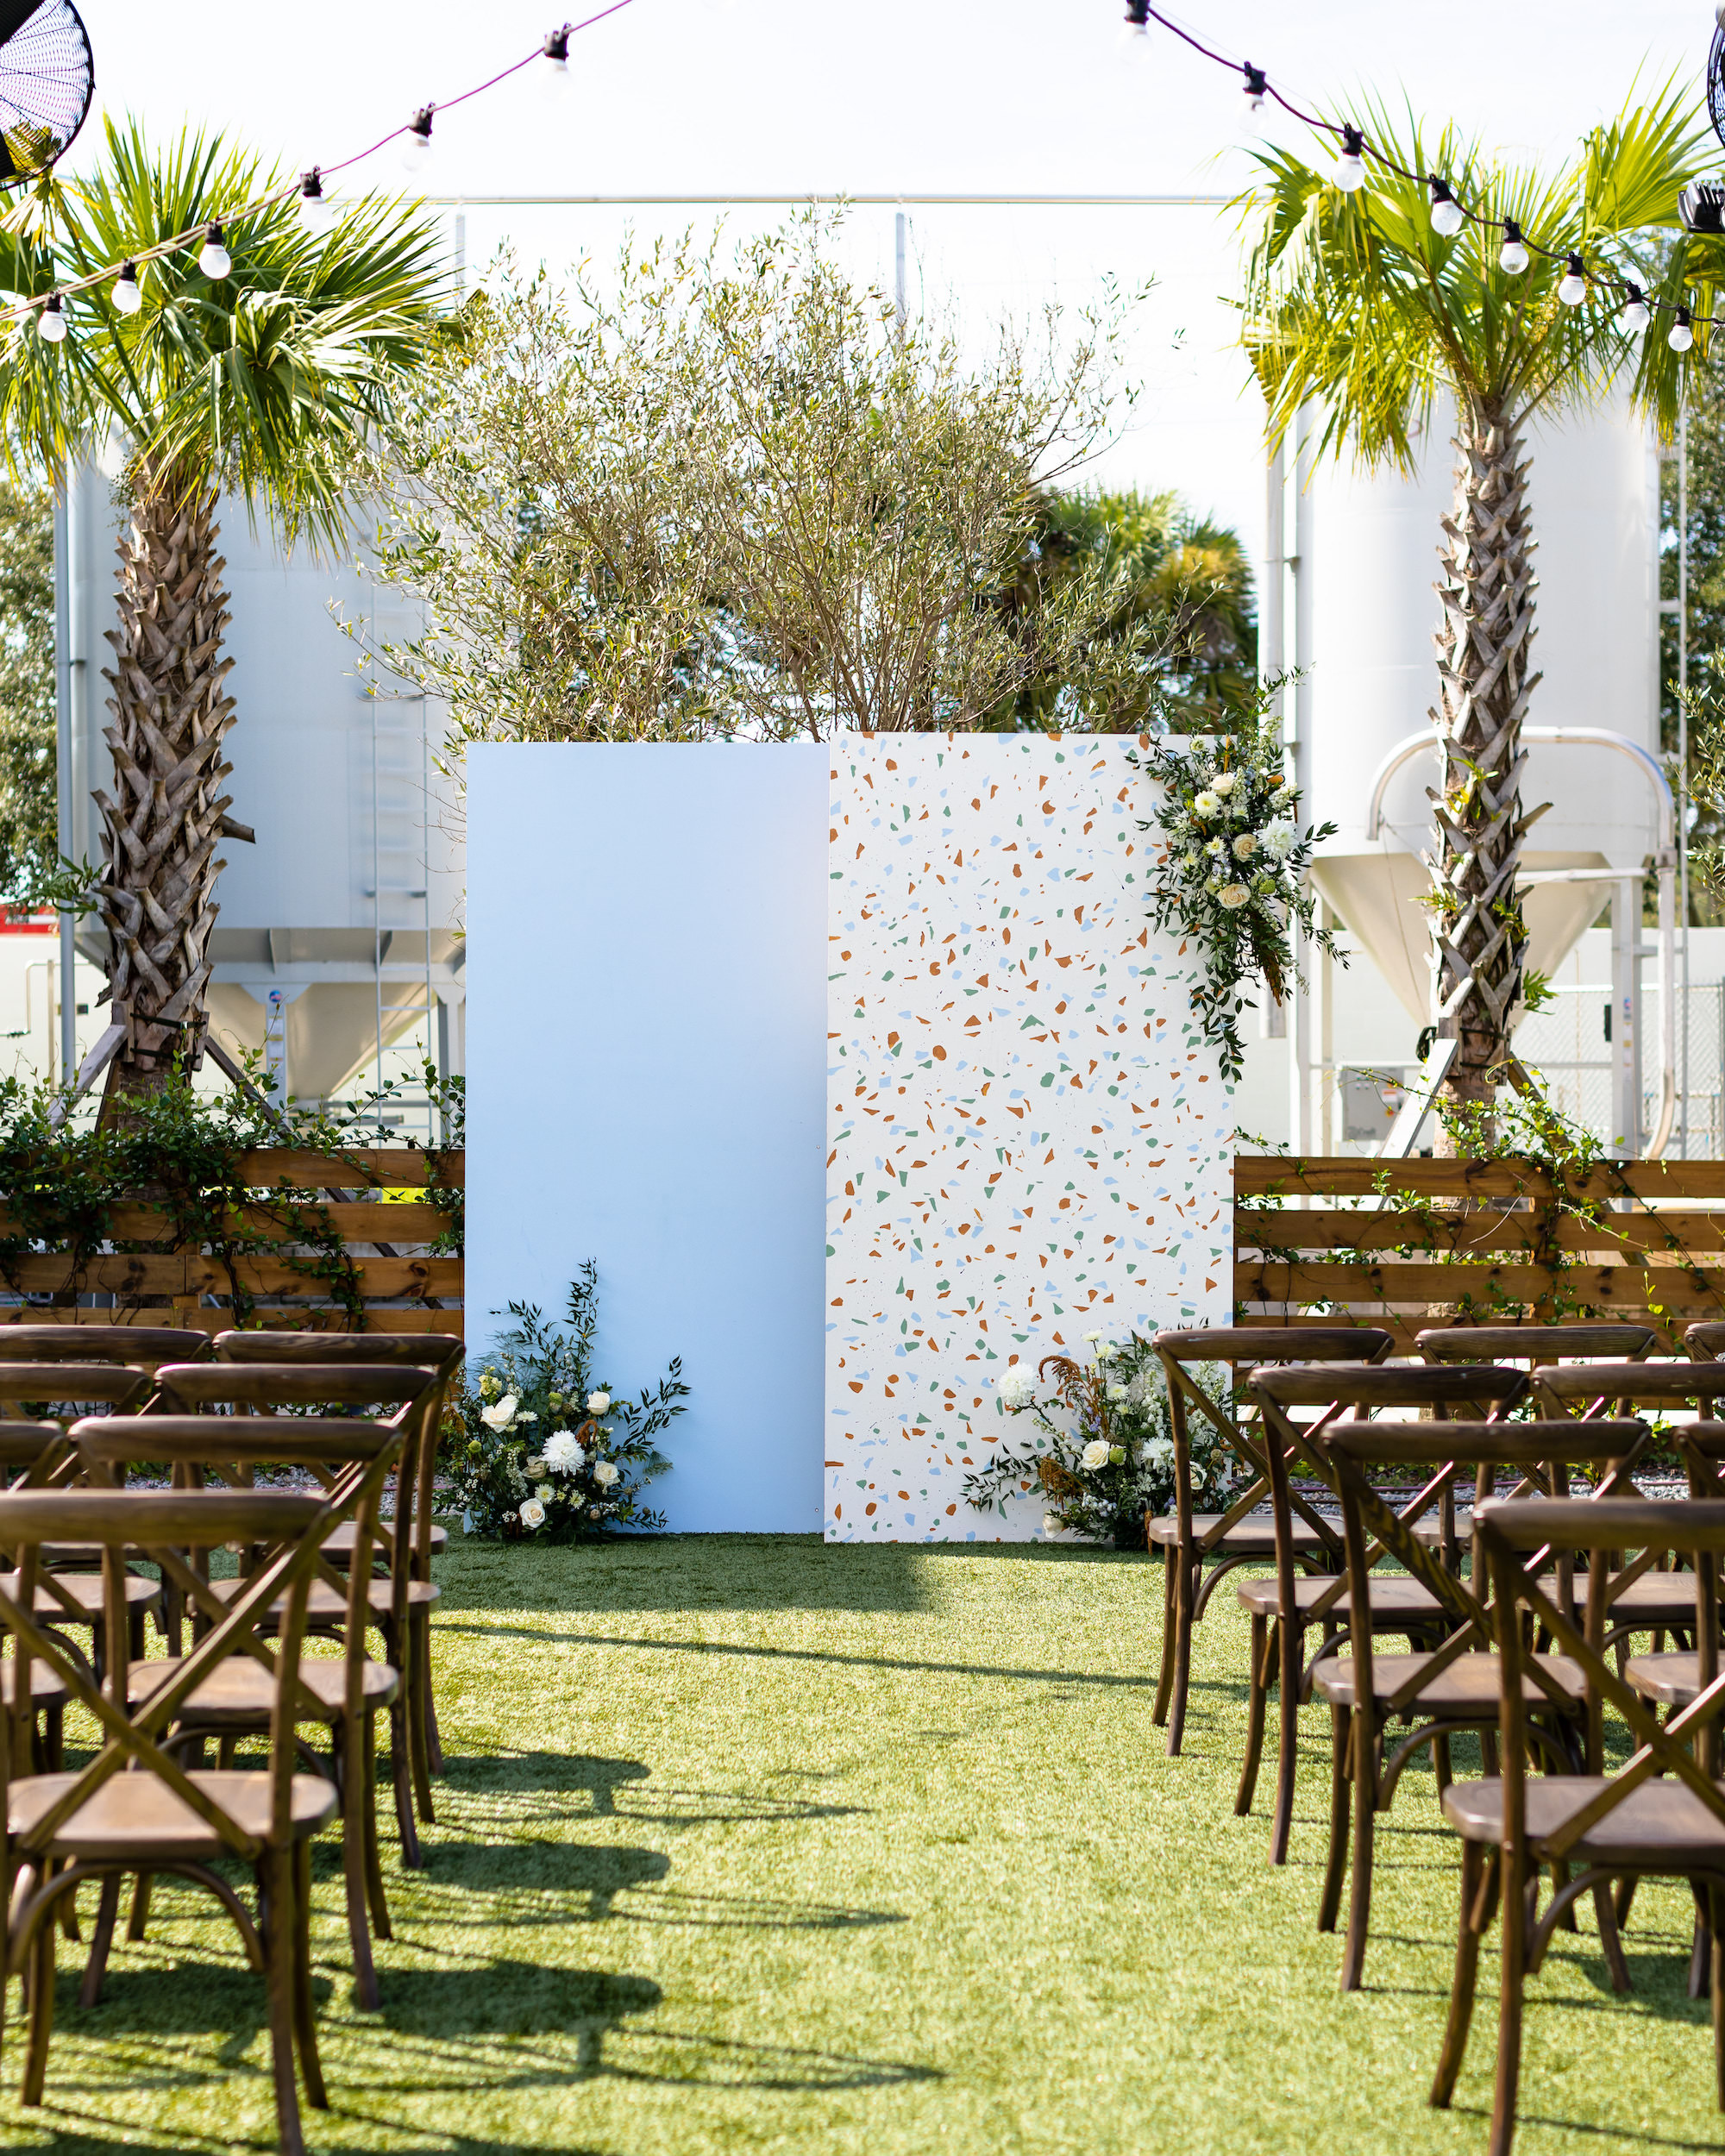 Modern Whimsical Wedding Ceremony Decor, Wooden Cross Back Chairs, Hanging Bistro Lights, Light Blue and Terrazzo Backdrop | Florida Avenue Brewing Co.